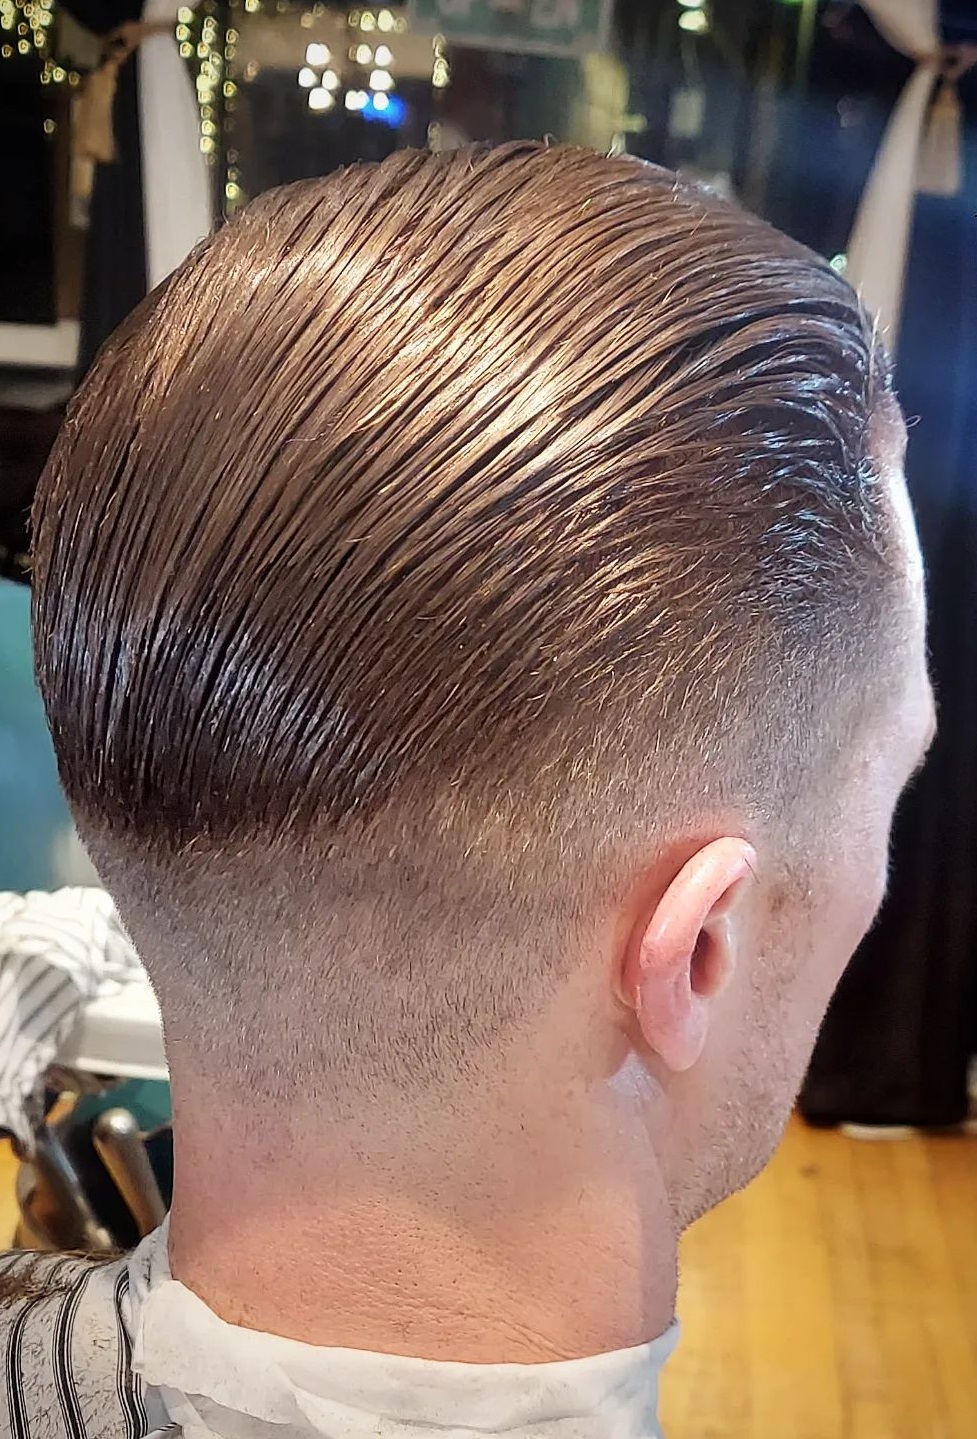 Slick Back Hairstyle - Hairstyle inspiration for men in 2022